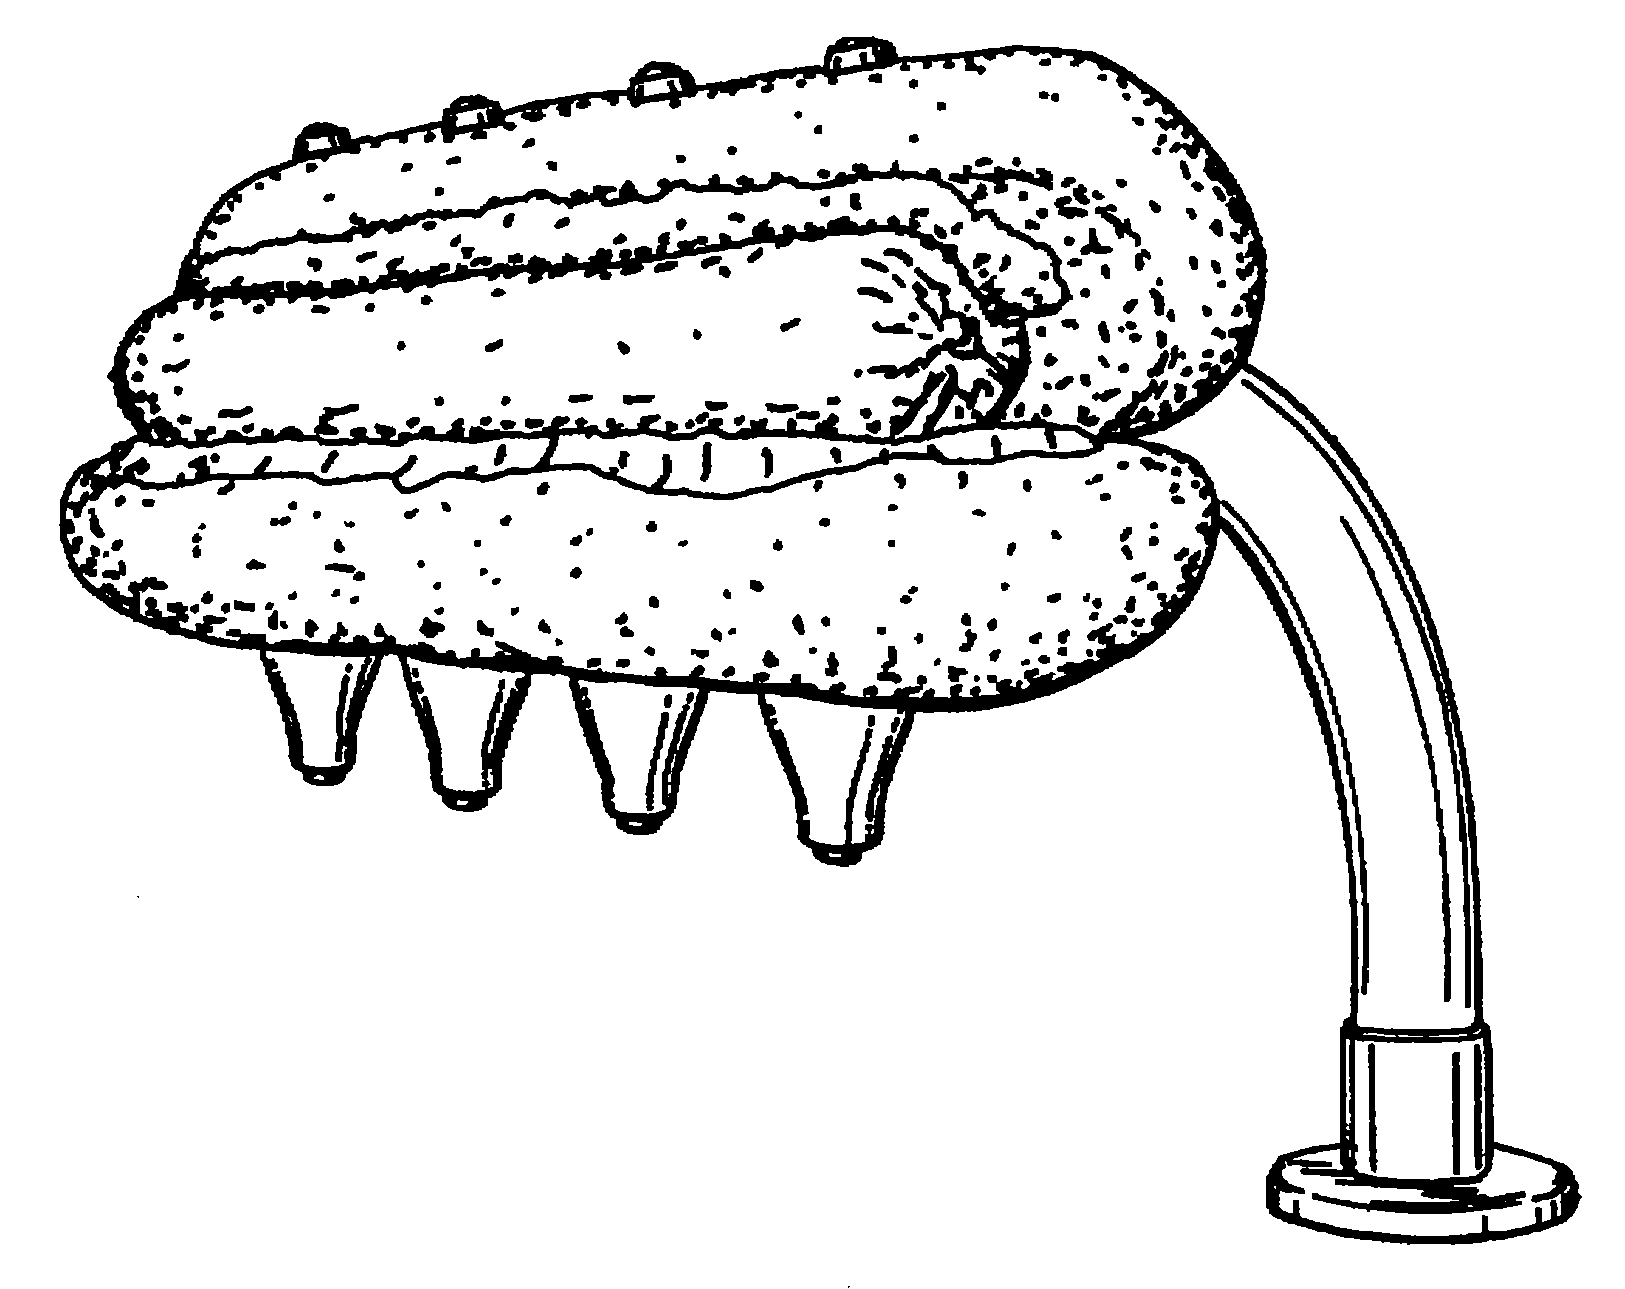 Example of a design  for a condiment dispenser with a simulativeconfiguration.
